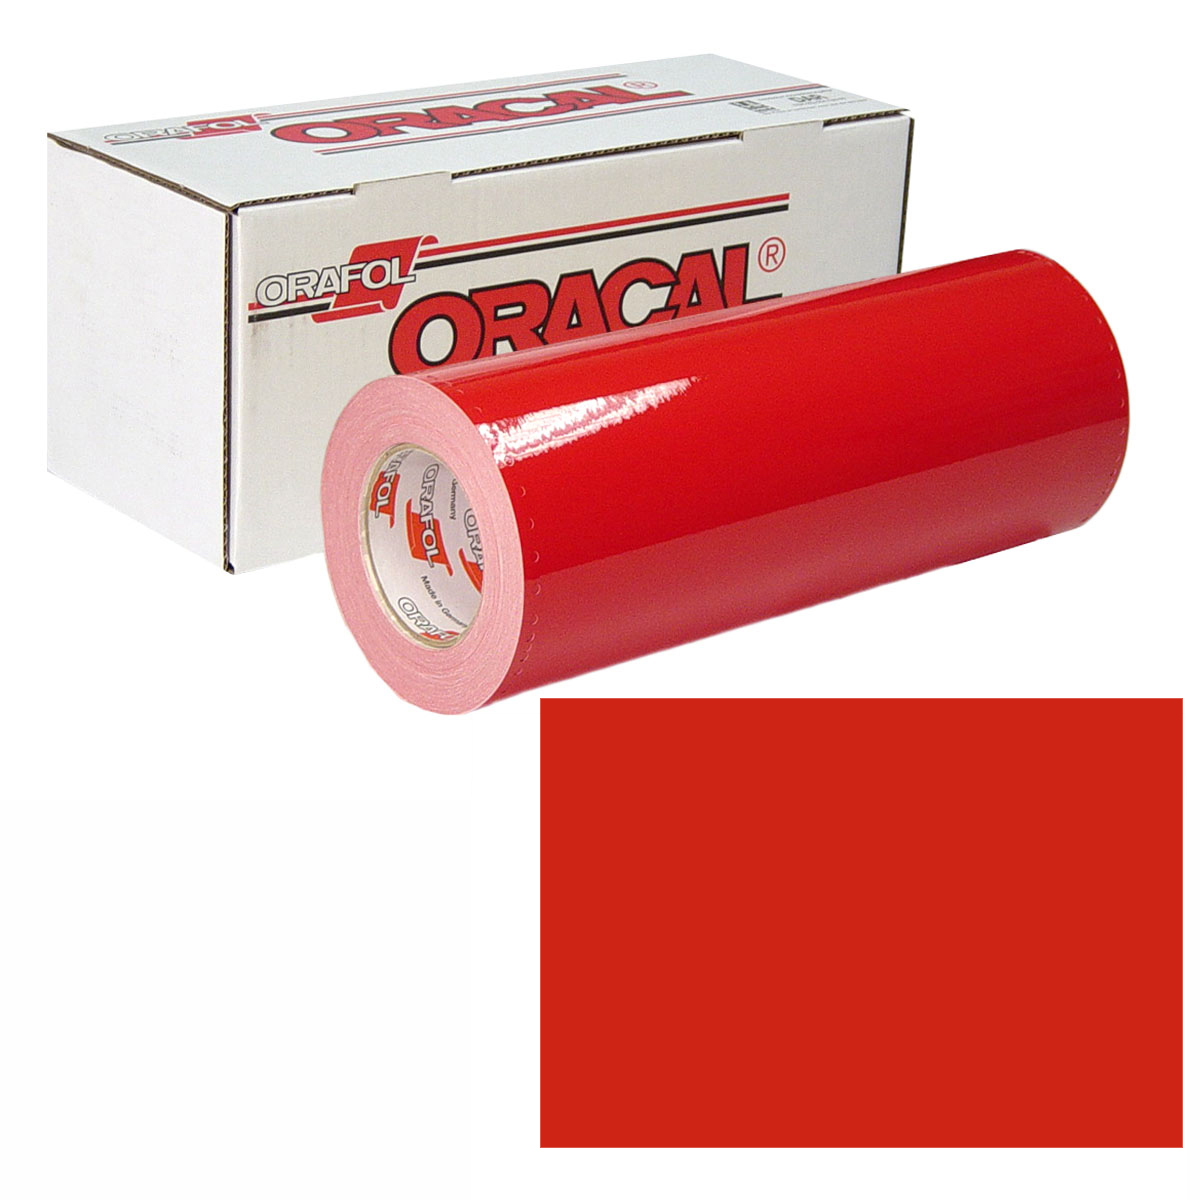 ORACAL 951 15in X 50yd 326 Signal Red